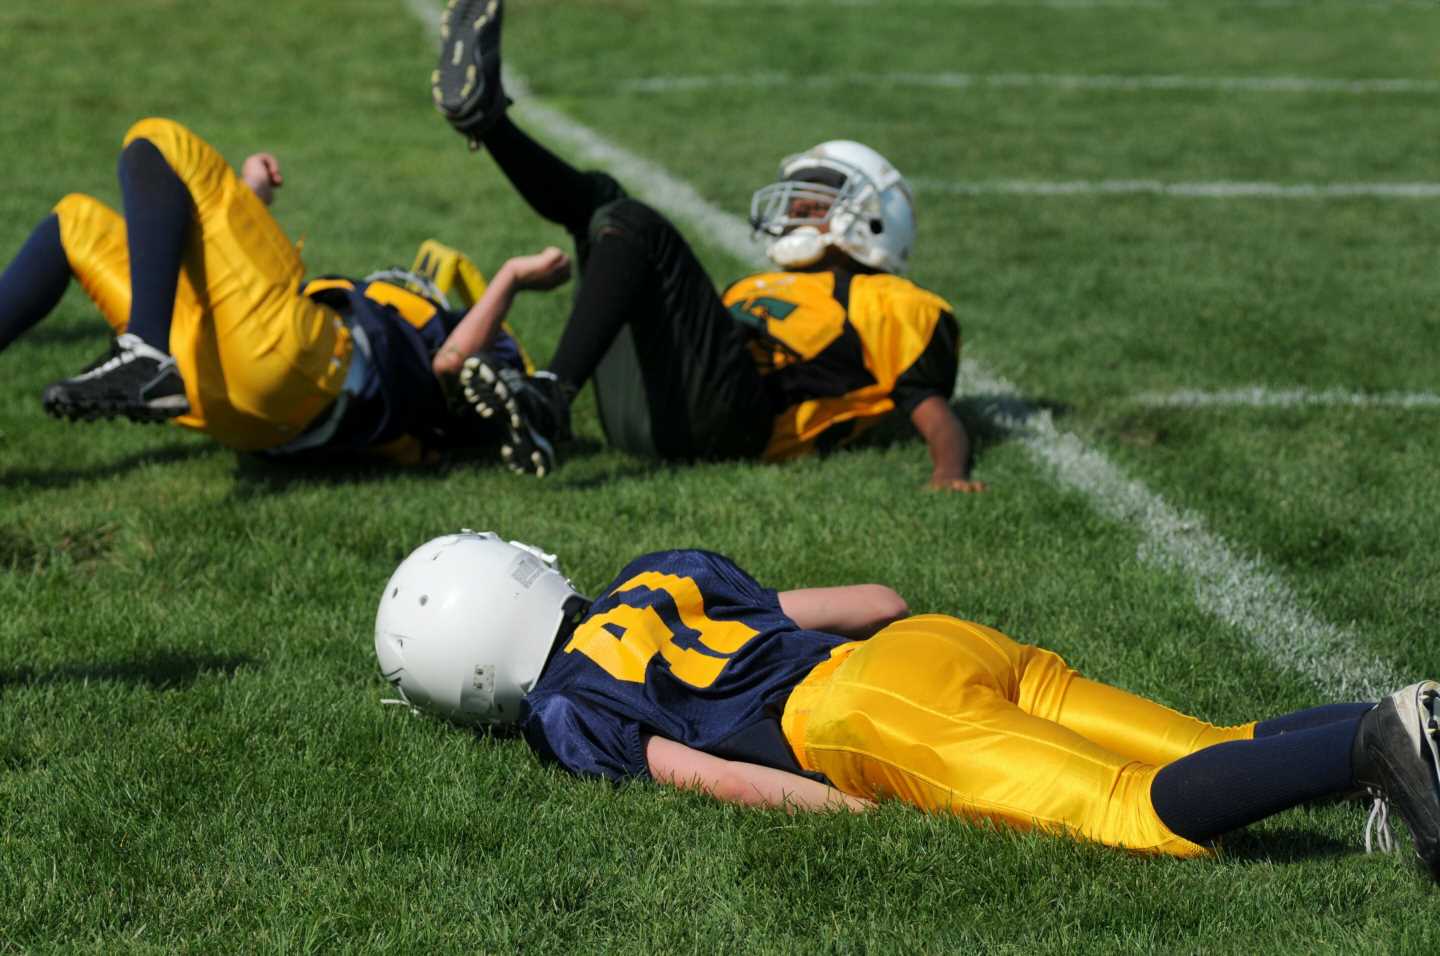 Expert panel revises sports concussion management recommendations for athletes at all levels